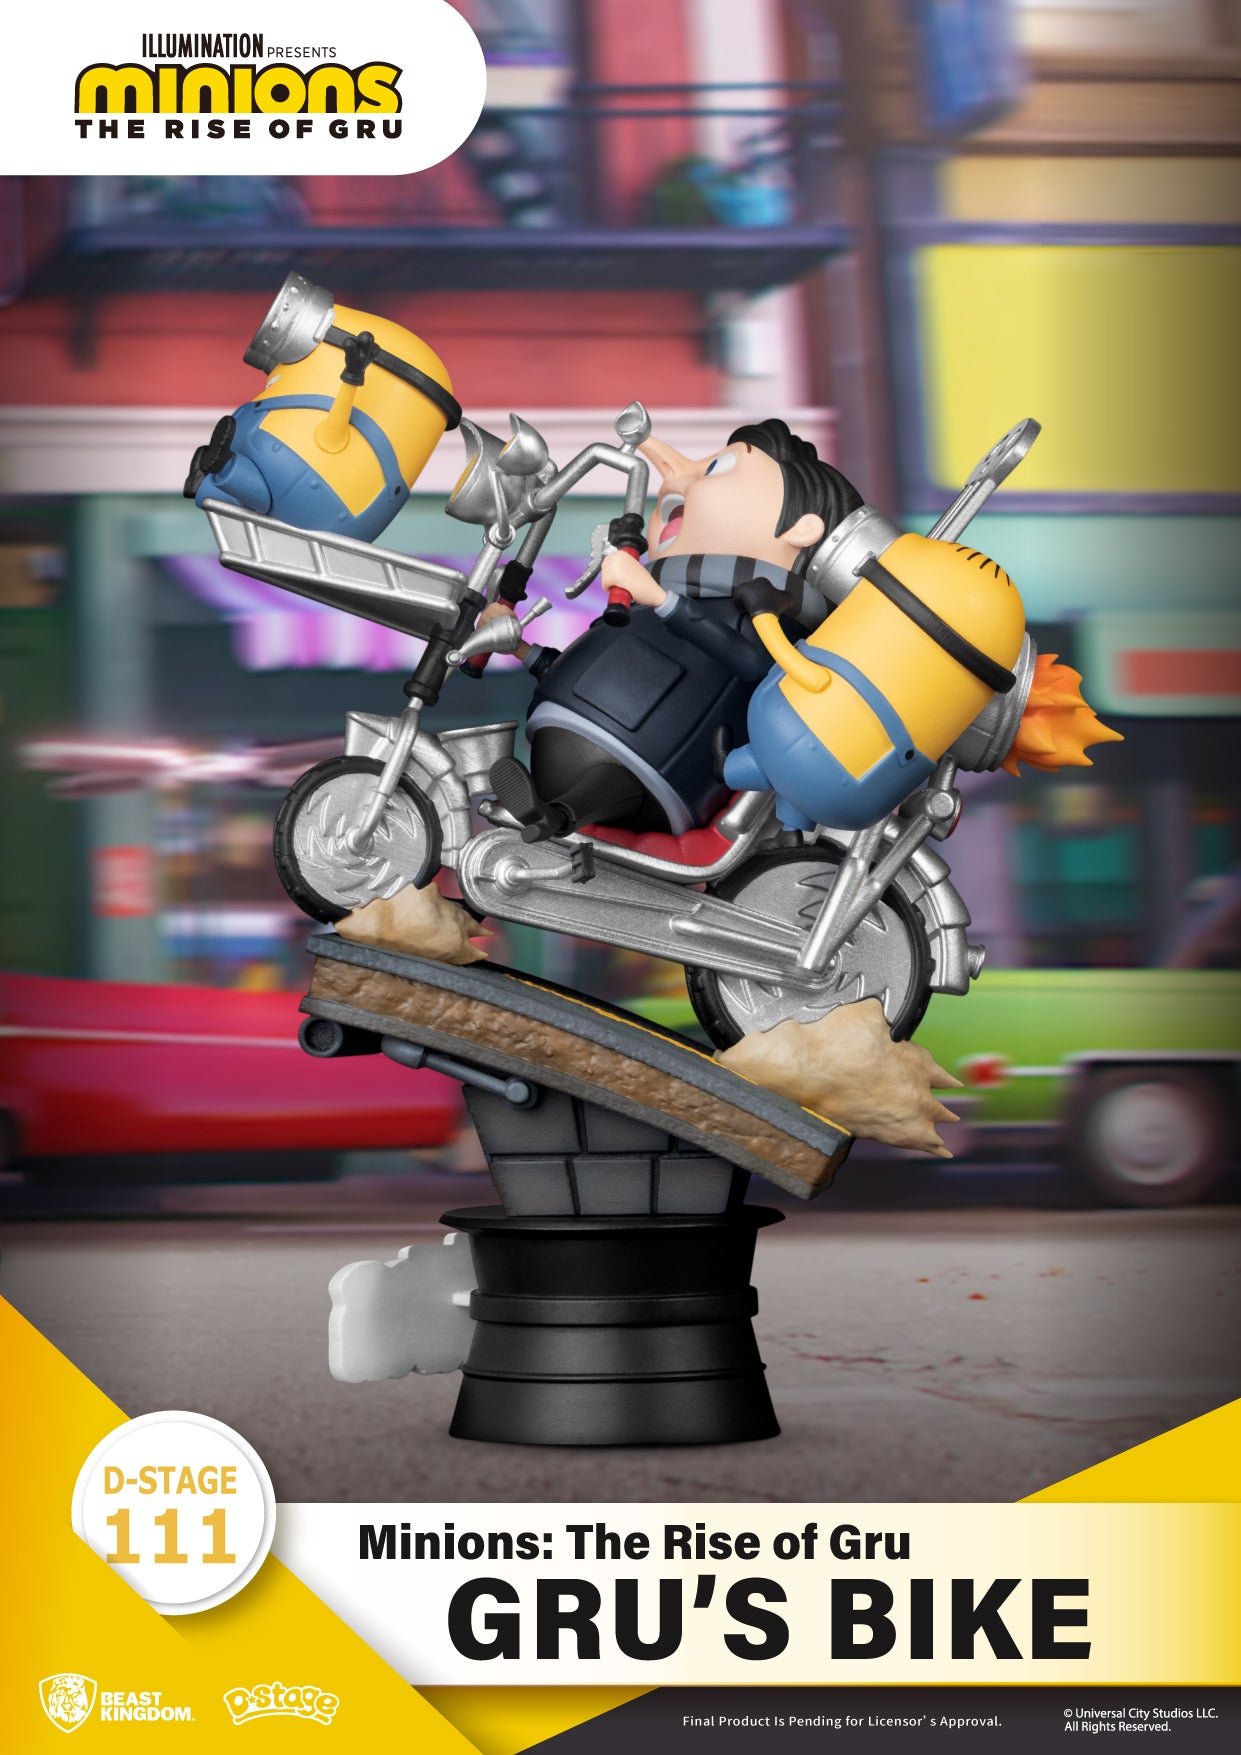 Minions: The Rise of Gru-Gru's Bike (D-Stage) DS-111